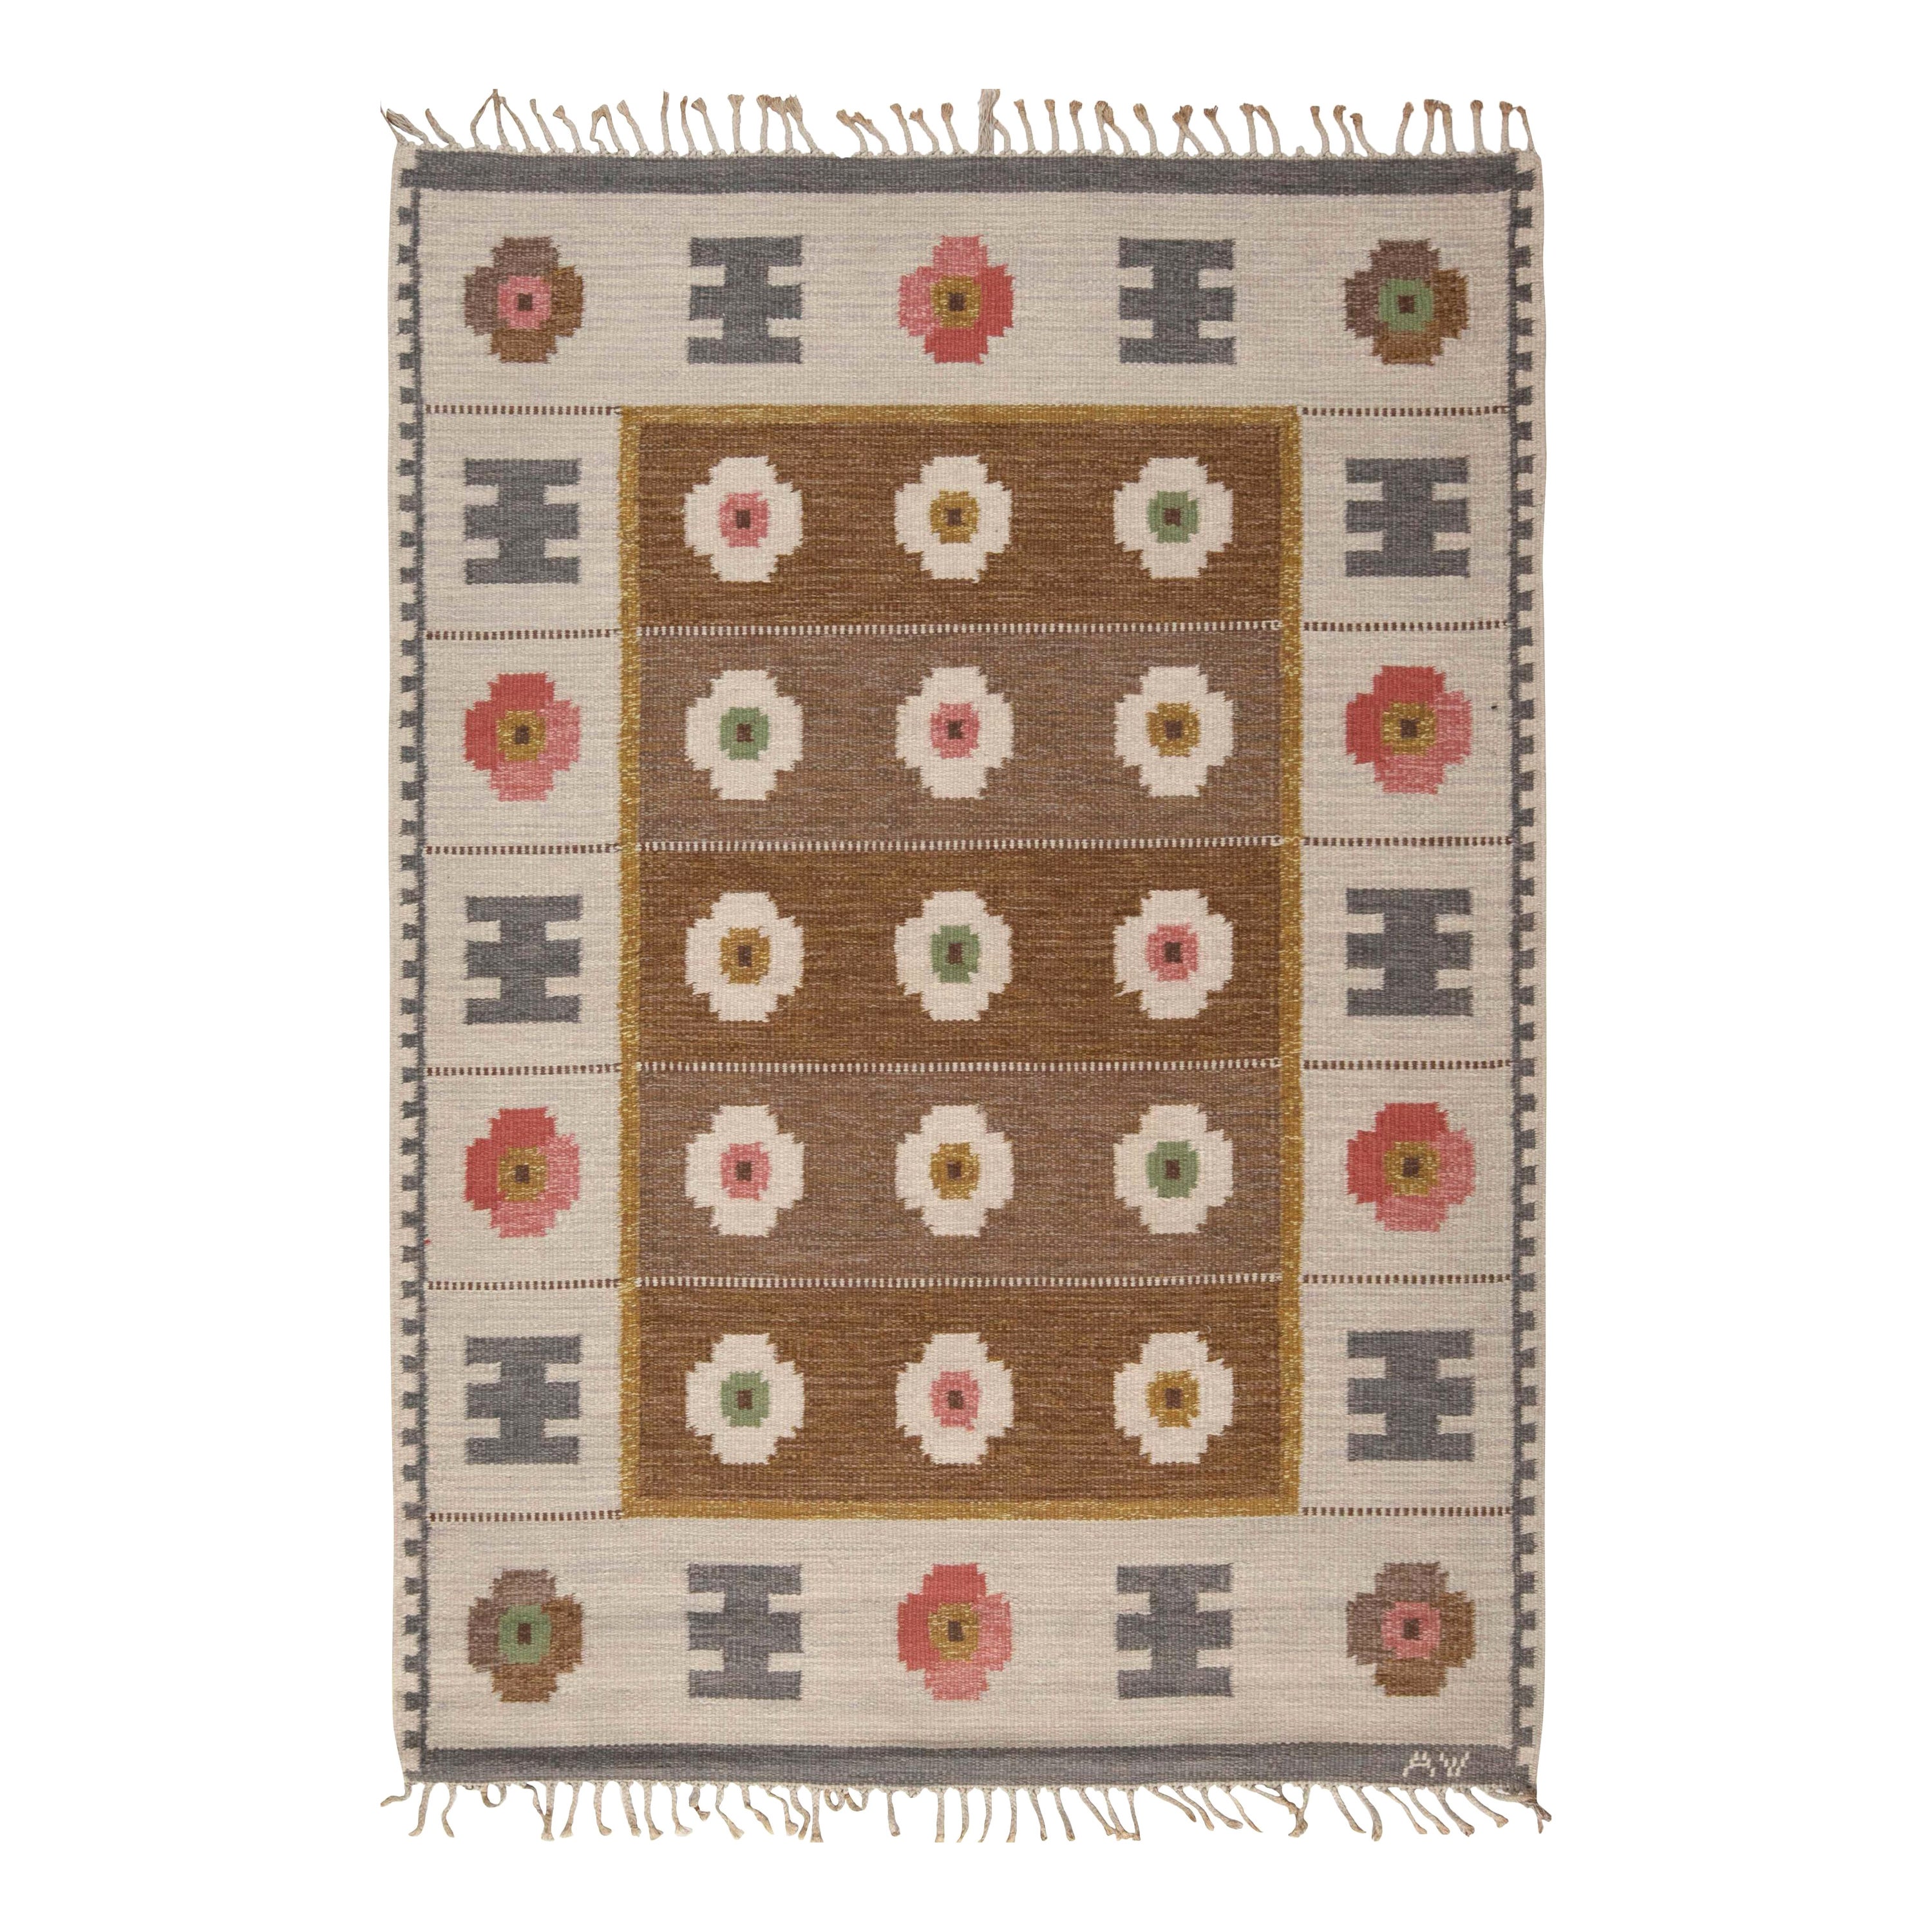 Midcentury Swedish Rug by Alice Wallebäck (AW) For Sale